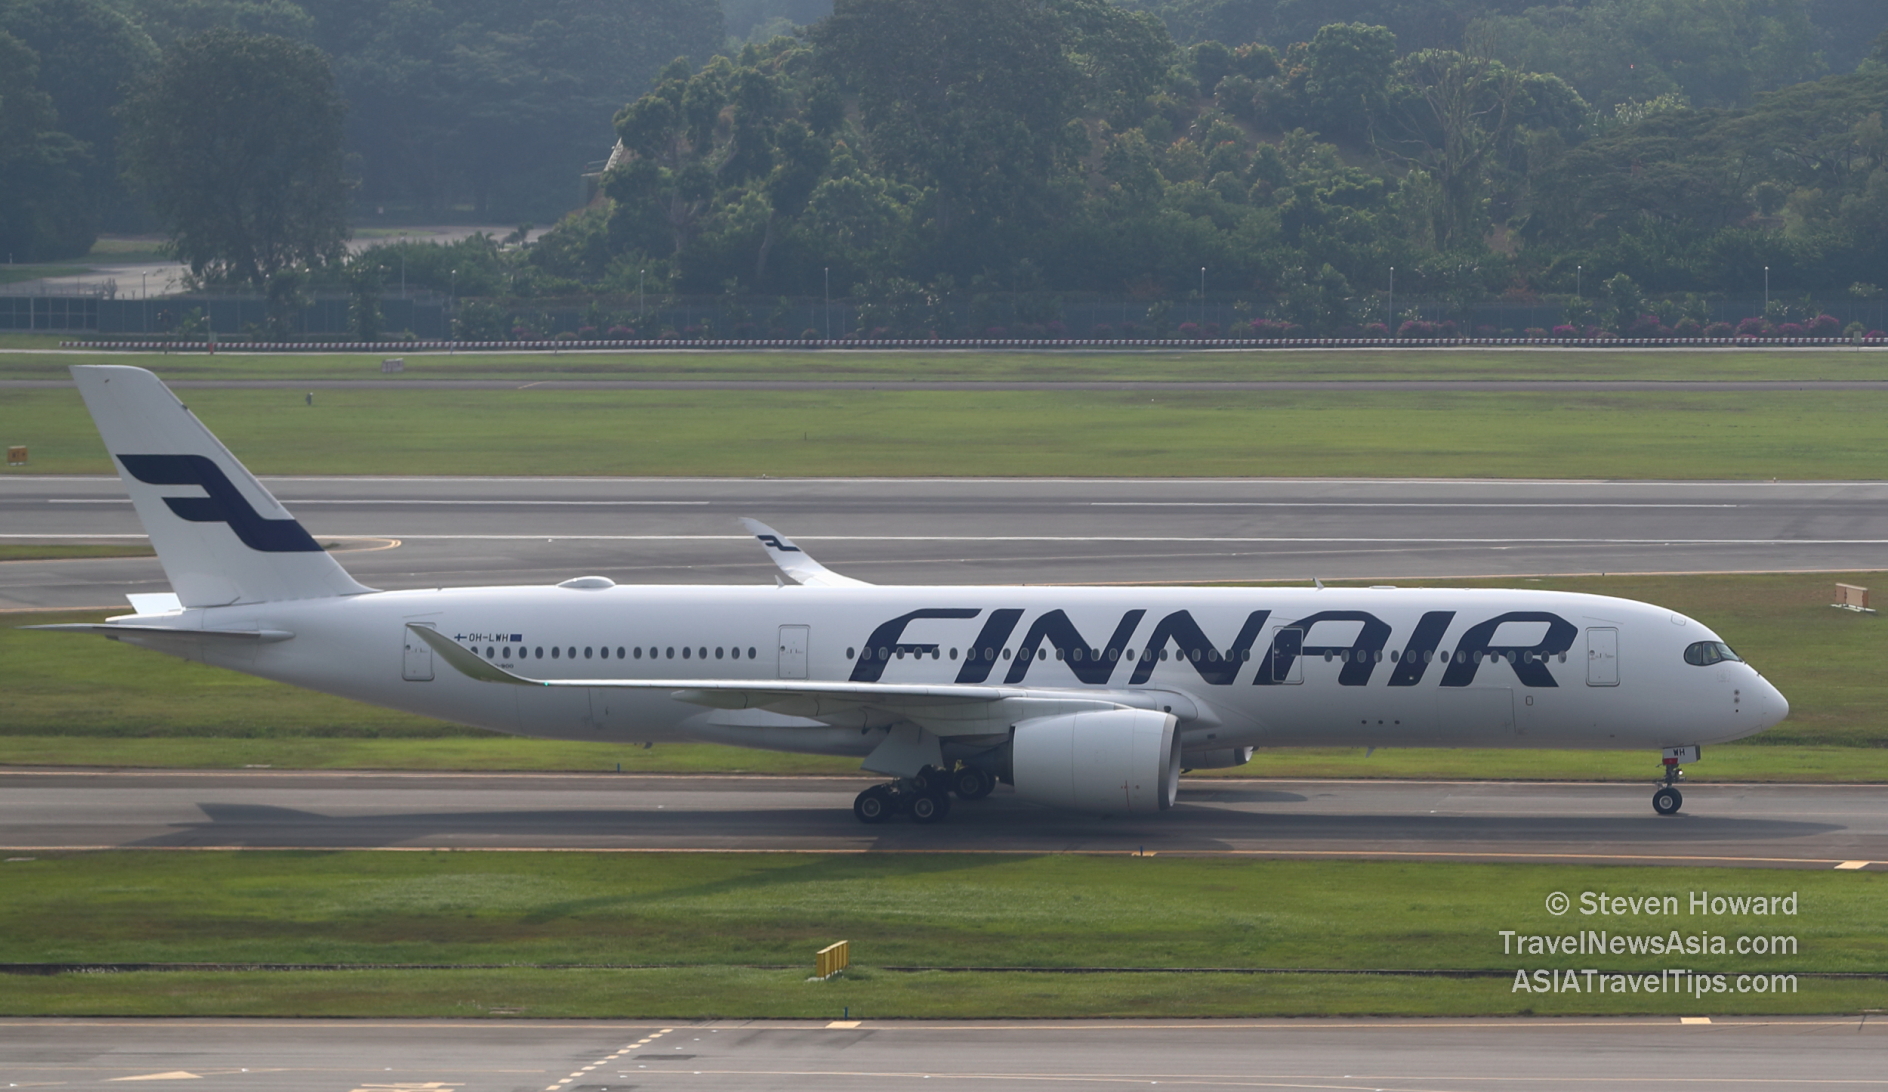 Finnair A350-900 reg: OH-LWH. Picture by Steven Howard of TravelNewsAsia.com Click to enlarge.